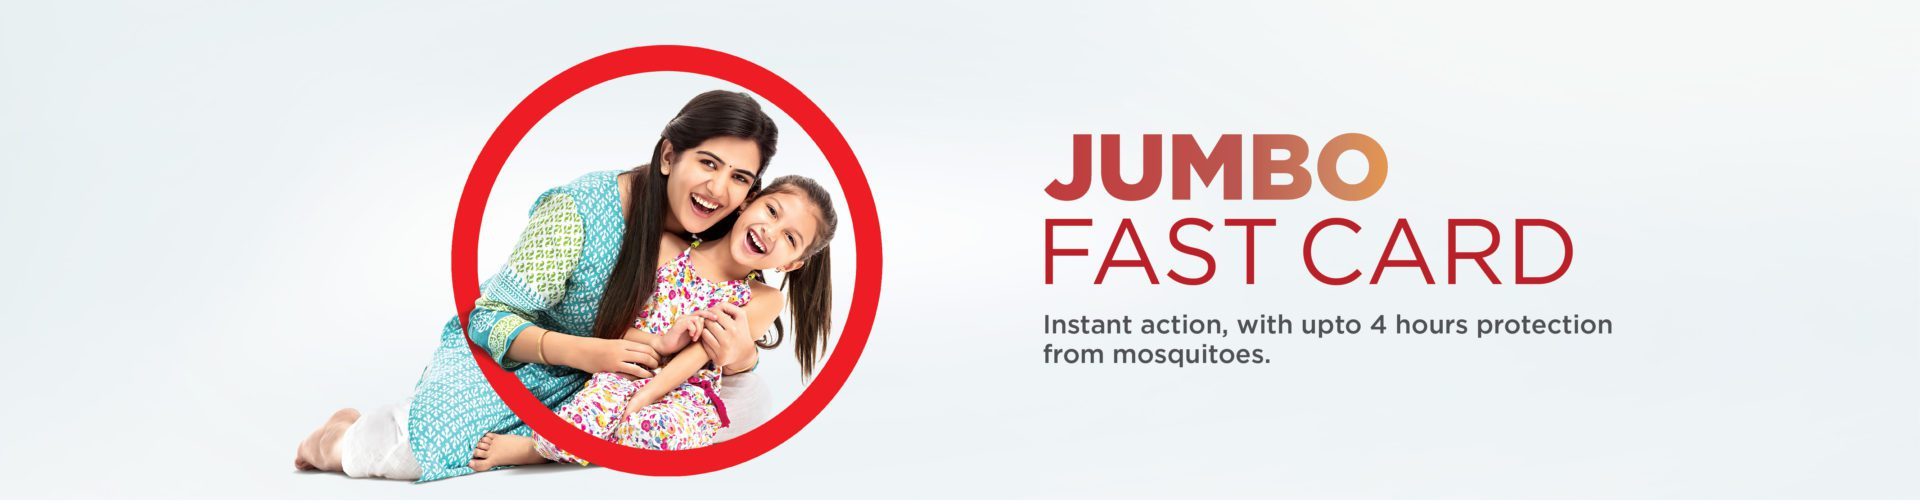 Goodknight Jumbo Fast Card initiates ‘#MaccharoKaLockdown’ in its new TVC for Jumbo Fast Card, a unique paper-based mosquito repellent